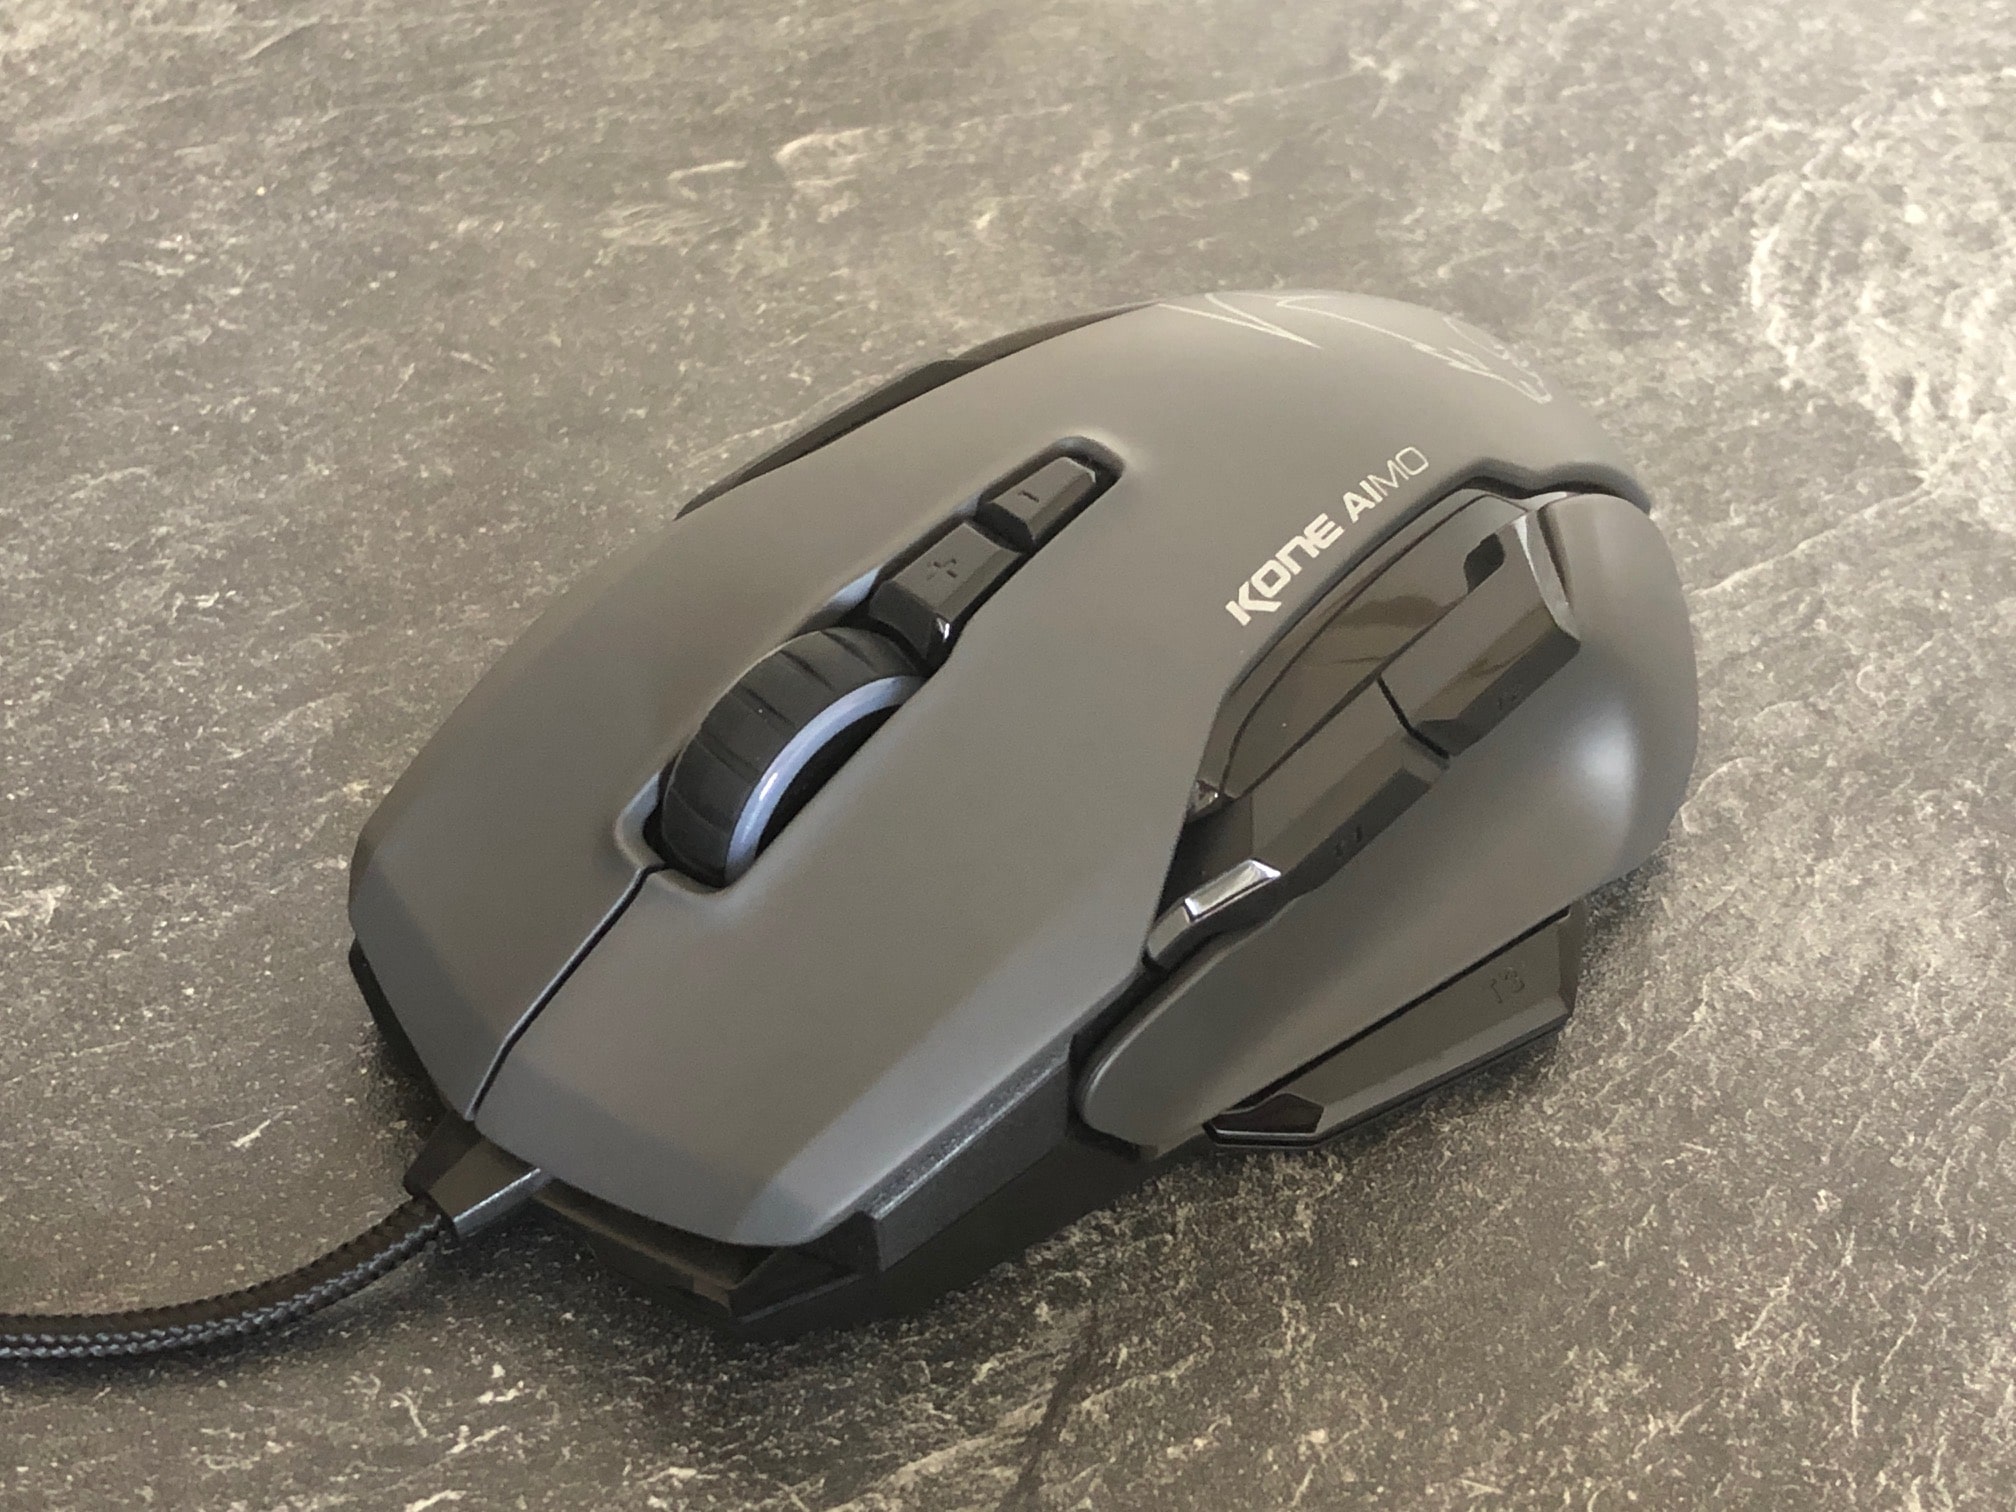 Roccat's Kone AIMO is a fantastic mouse and is down to $60 right now